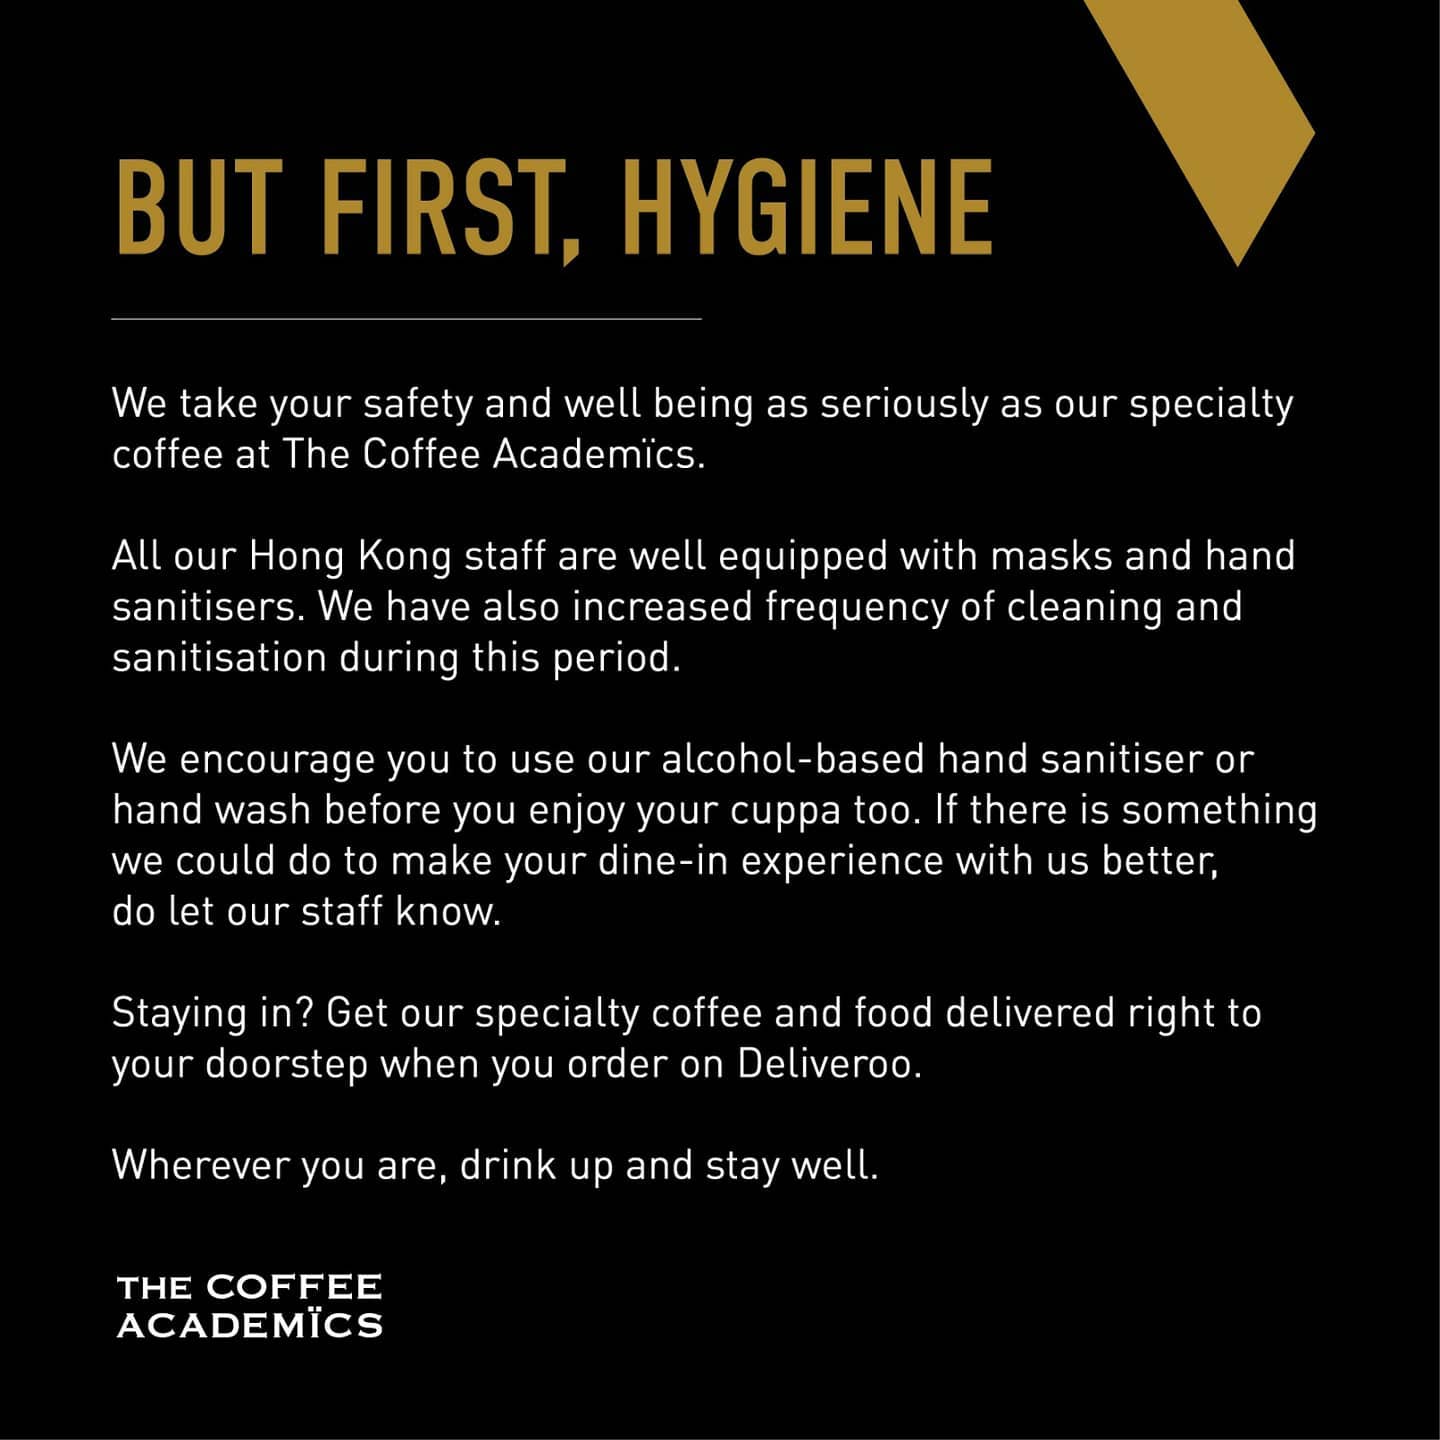 We take your safety and well being as seriously as our specialty coffee at The Coffee Academïcs